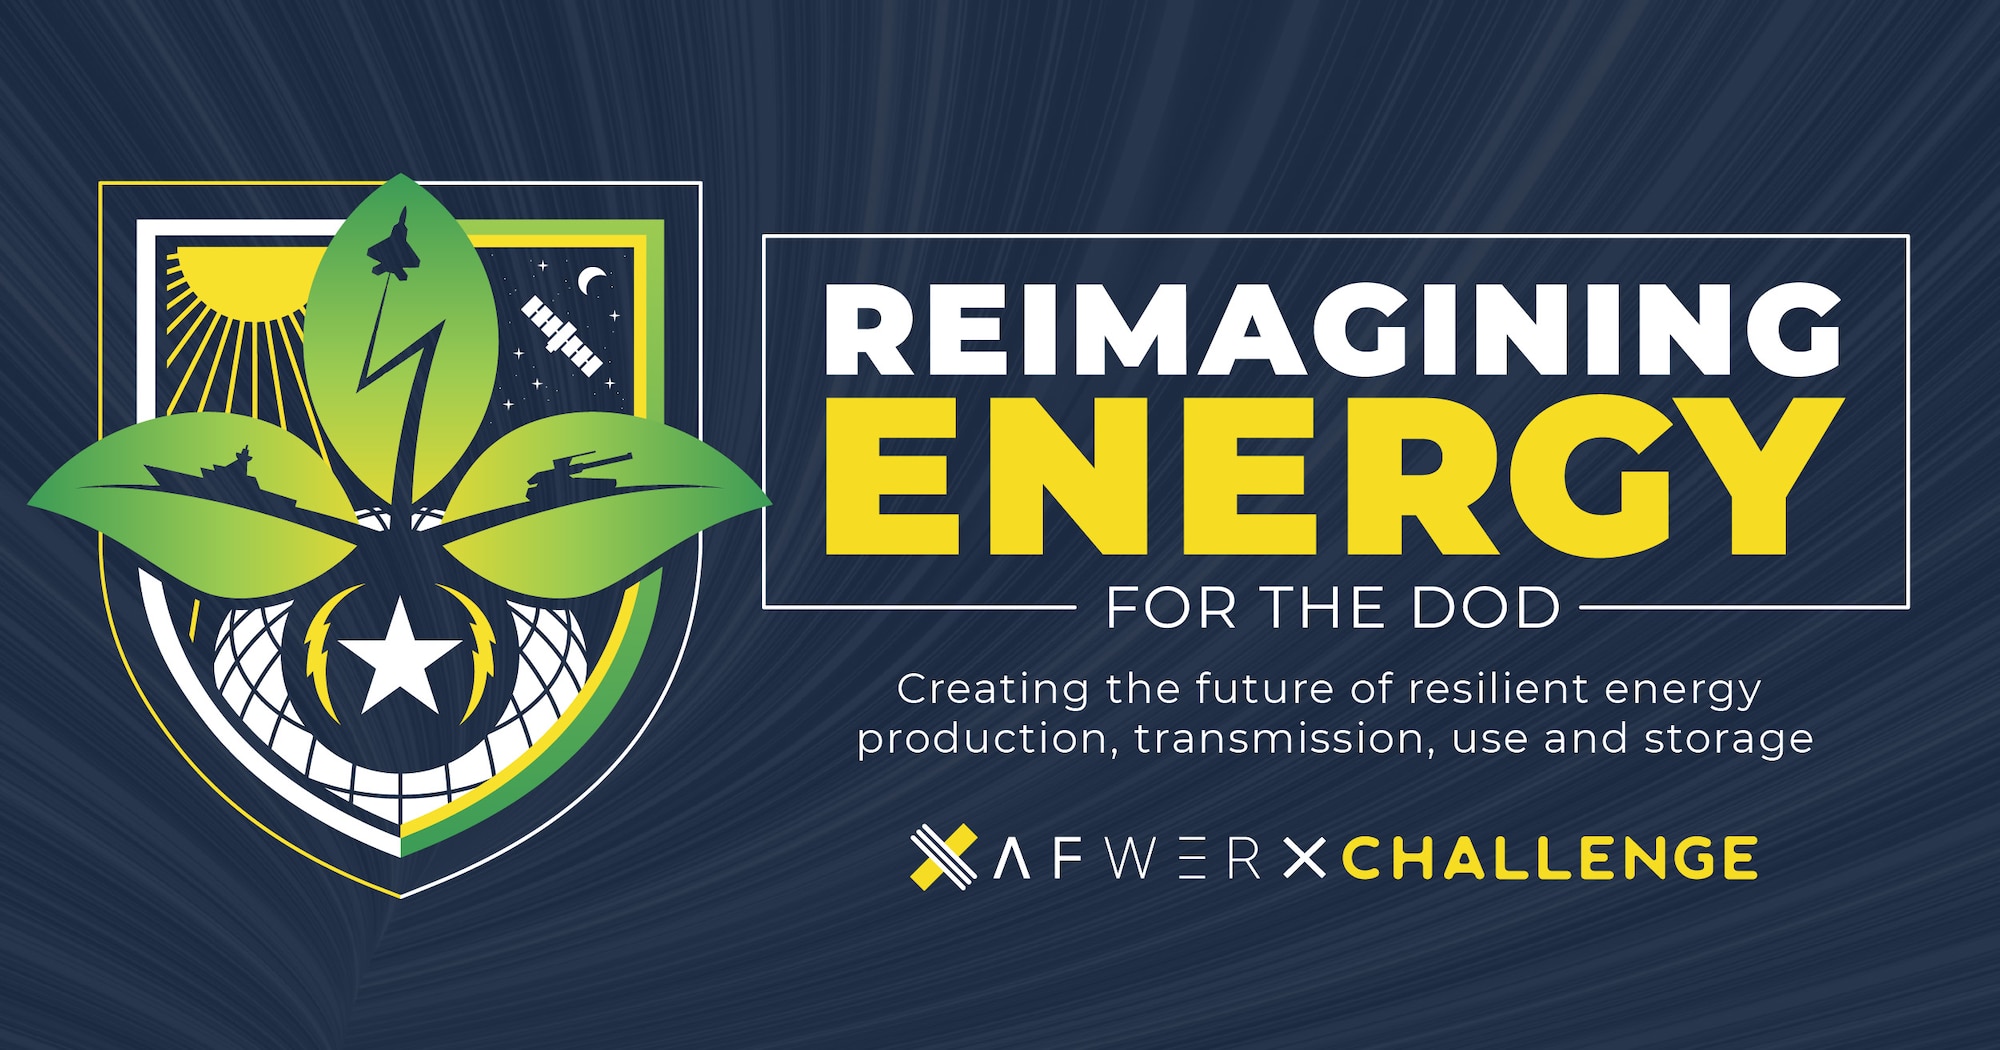 The Energy Challenge, an open crowdsourcing initiative, sought solutions to innovatively shape the future of resilient energy production, transmission, use and storage, thereby reducing demand and reliance on fossil fuels, while modernizing the energy infrastructure.